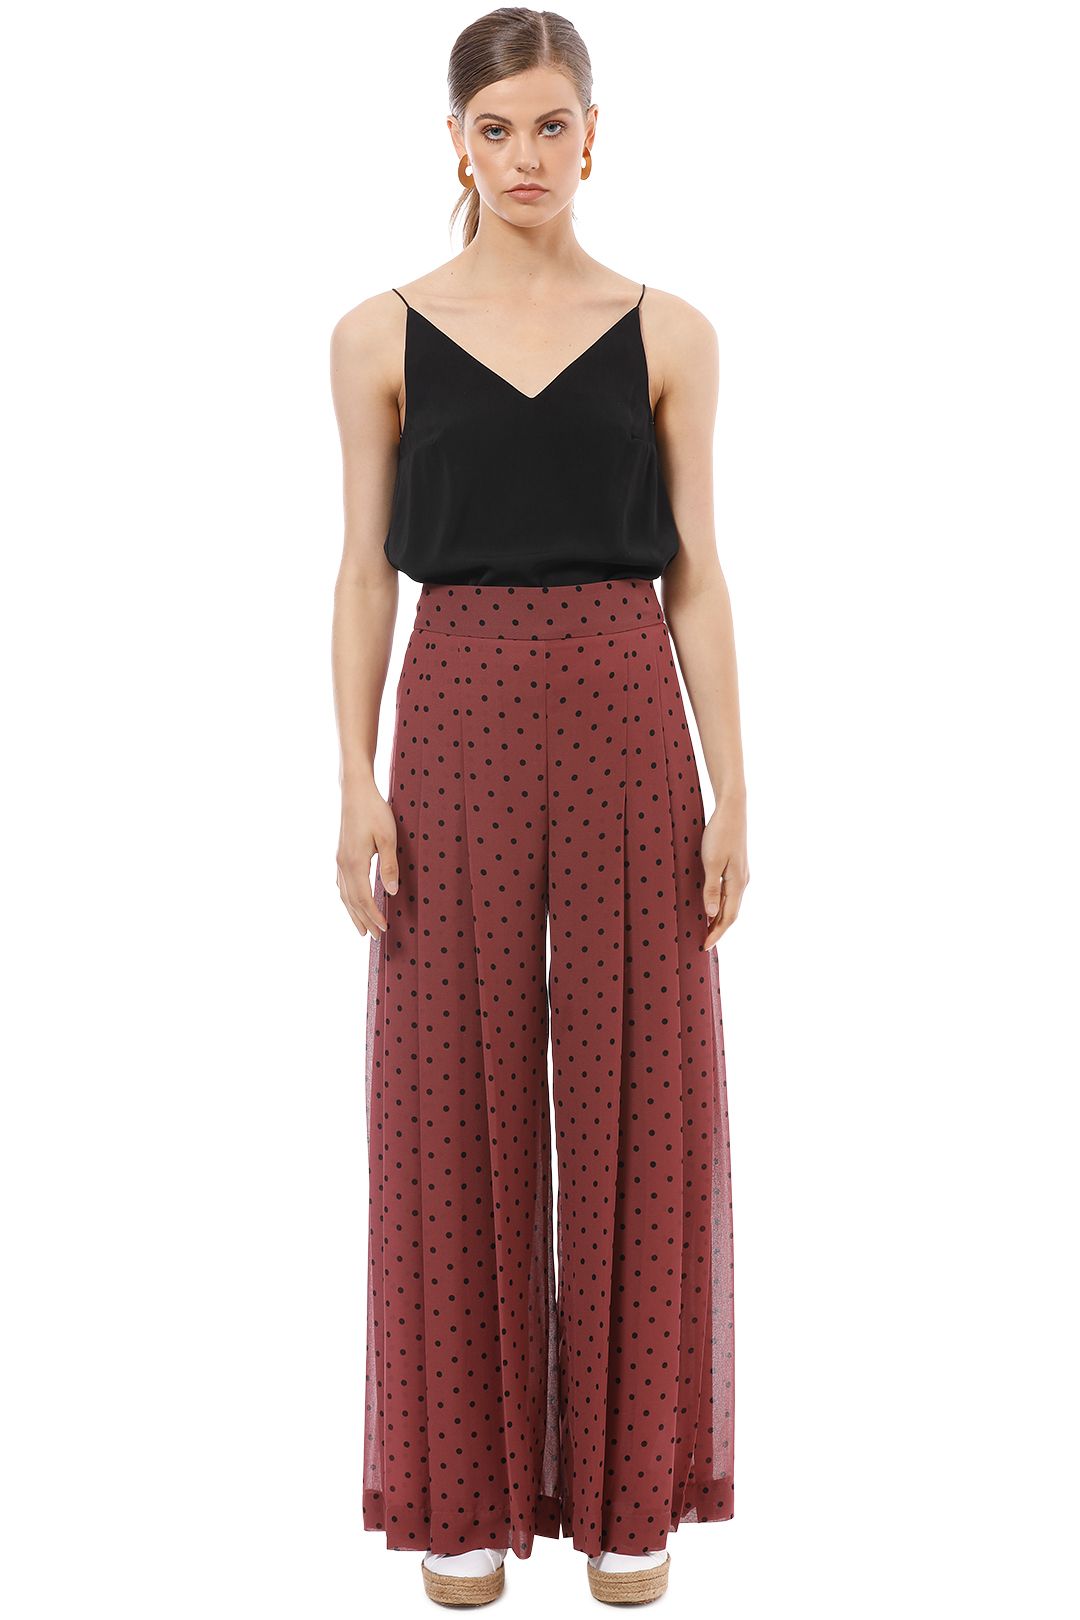 See by Chloe - Pleated Polka Dot Pant - Burgundy - Front